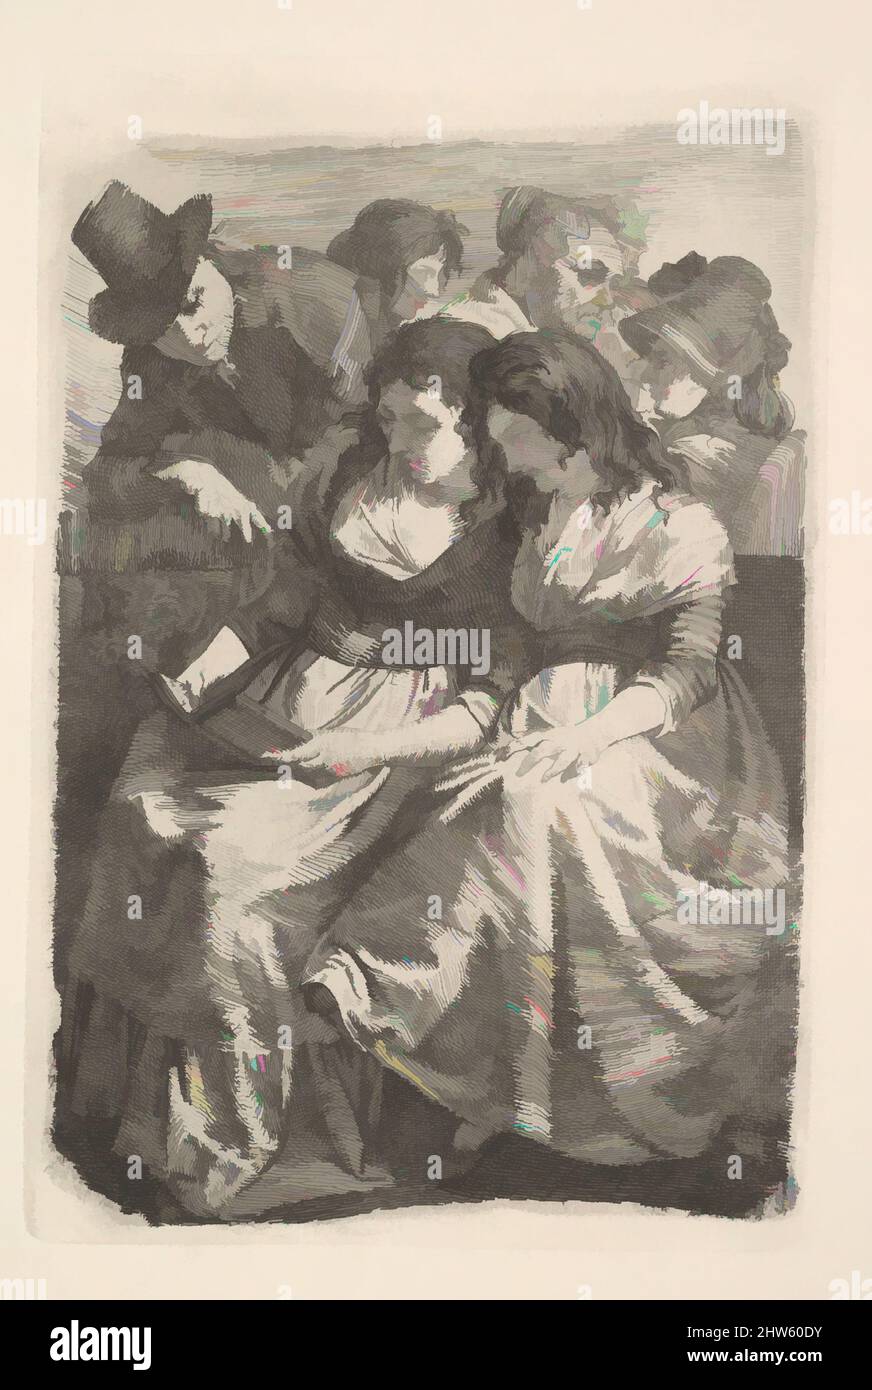 Art inspired by Schadow and His Family, 1925, Etching, restrike, 6 7/8 x 4 1/2 in. (17.5 x 11.4 cm), Prints, Johann Gottfried Schadow (German, Berlin 1764–1850 Berlin, Classic works modernized by Artotop with a splash of modernity. Shapes, color and value, eye-catching visual impact on art. Emotions through freedom of artworks in a contemporary way. A timeless message pursuing a wildly creative new direction. Artists turning to the digital medium and creating the Artotop NFT Stock Photo